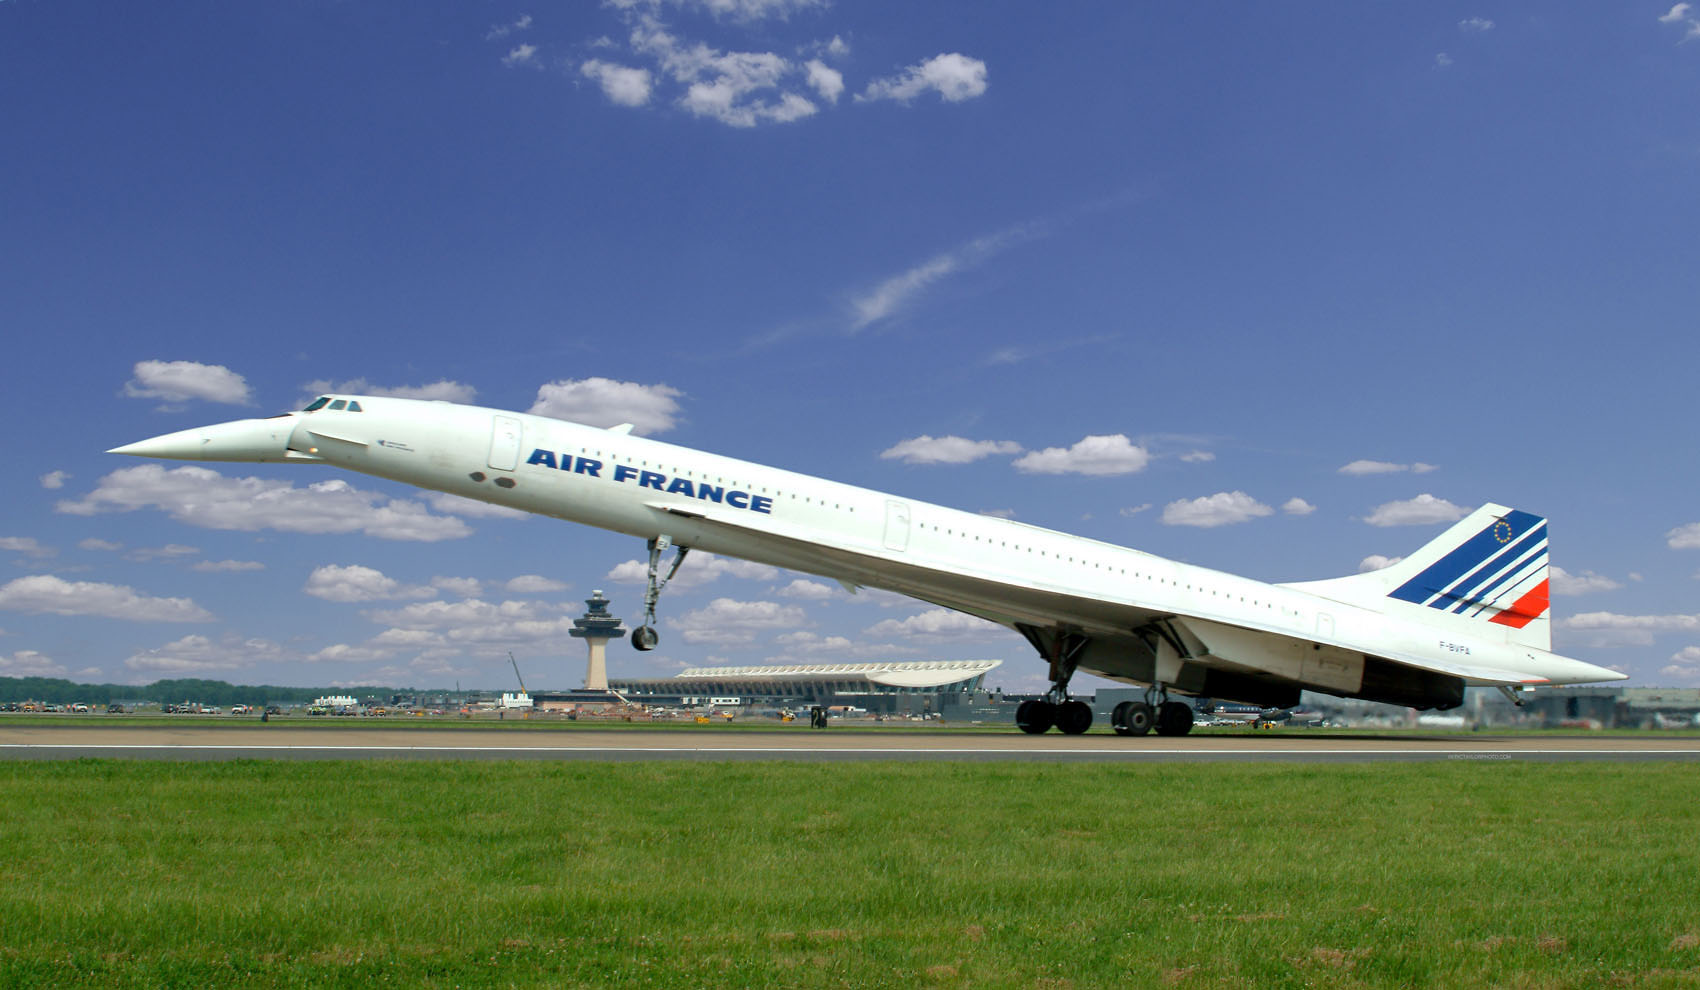 Concorde airplane touching down